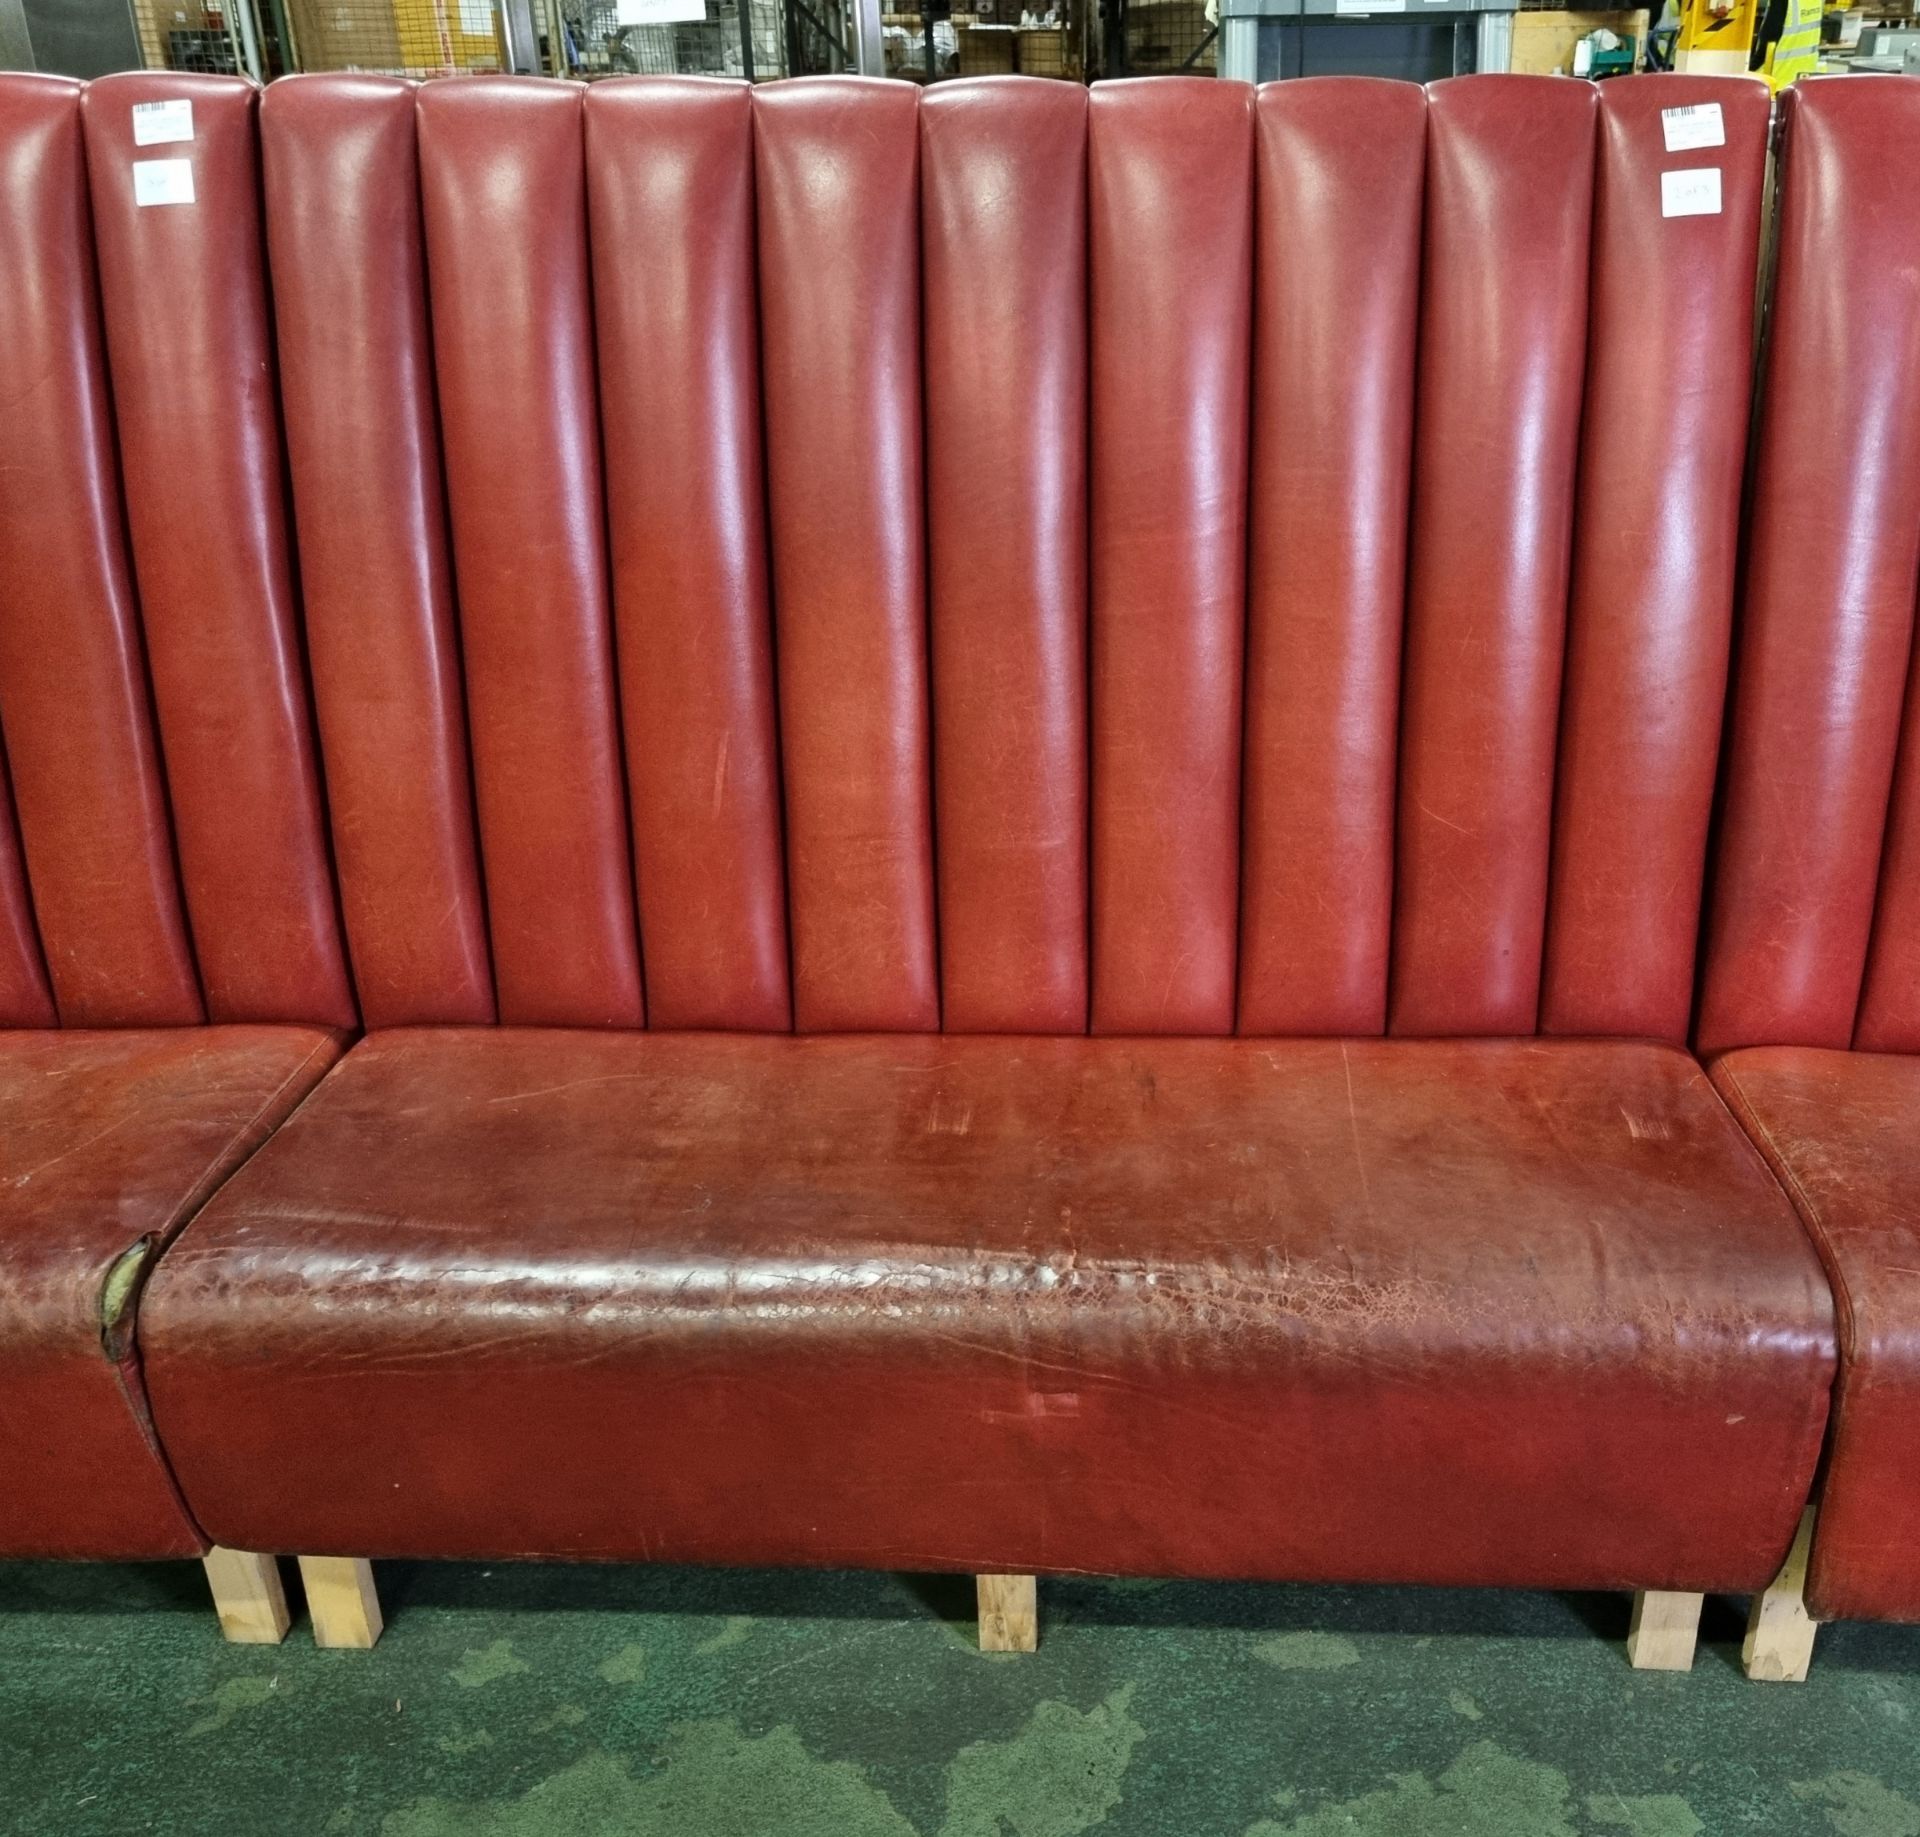 Red leather padded bench seating - Bild 4 aus 5